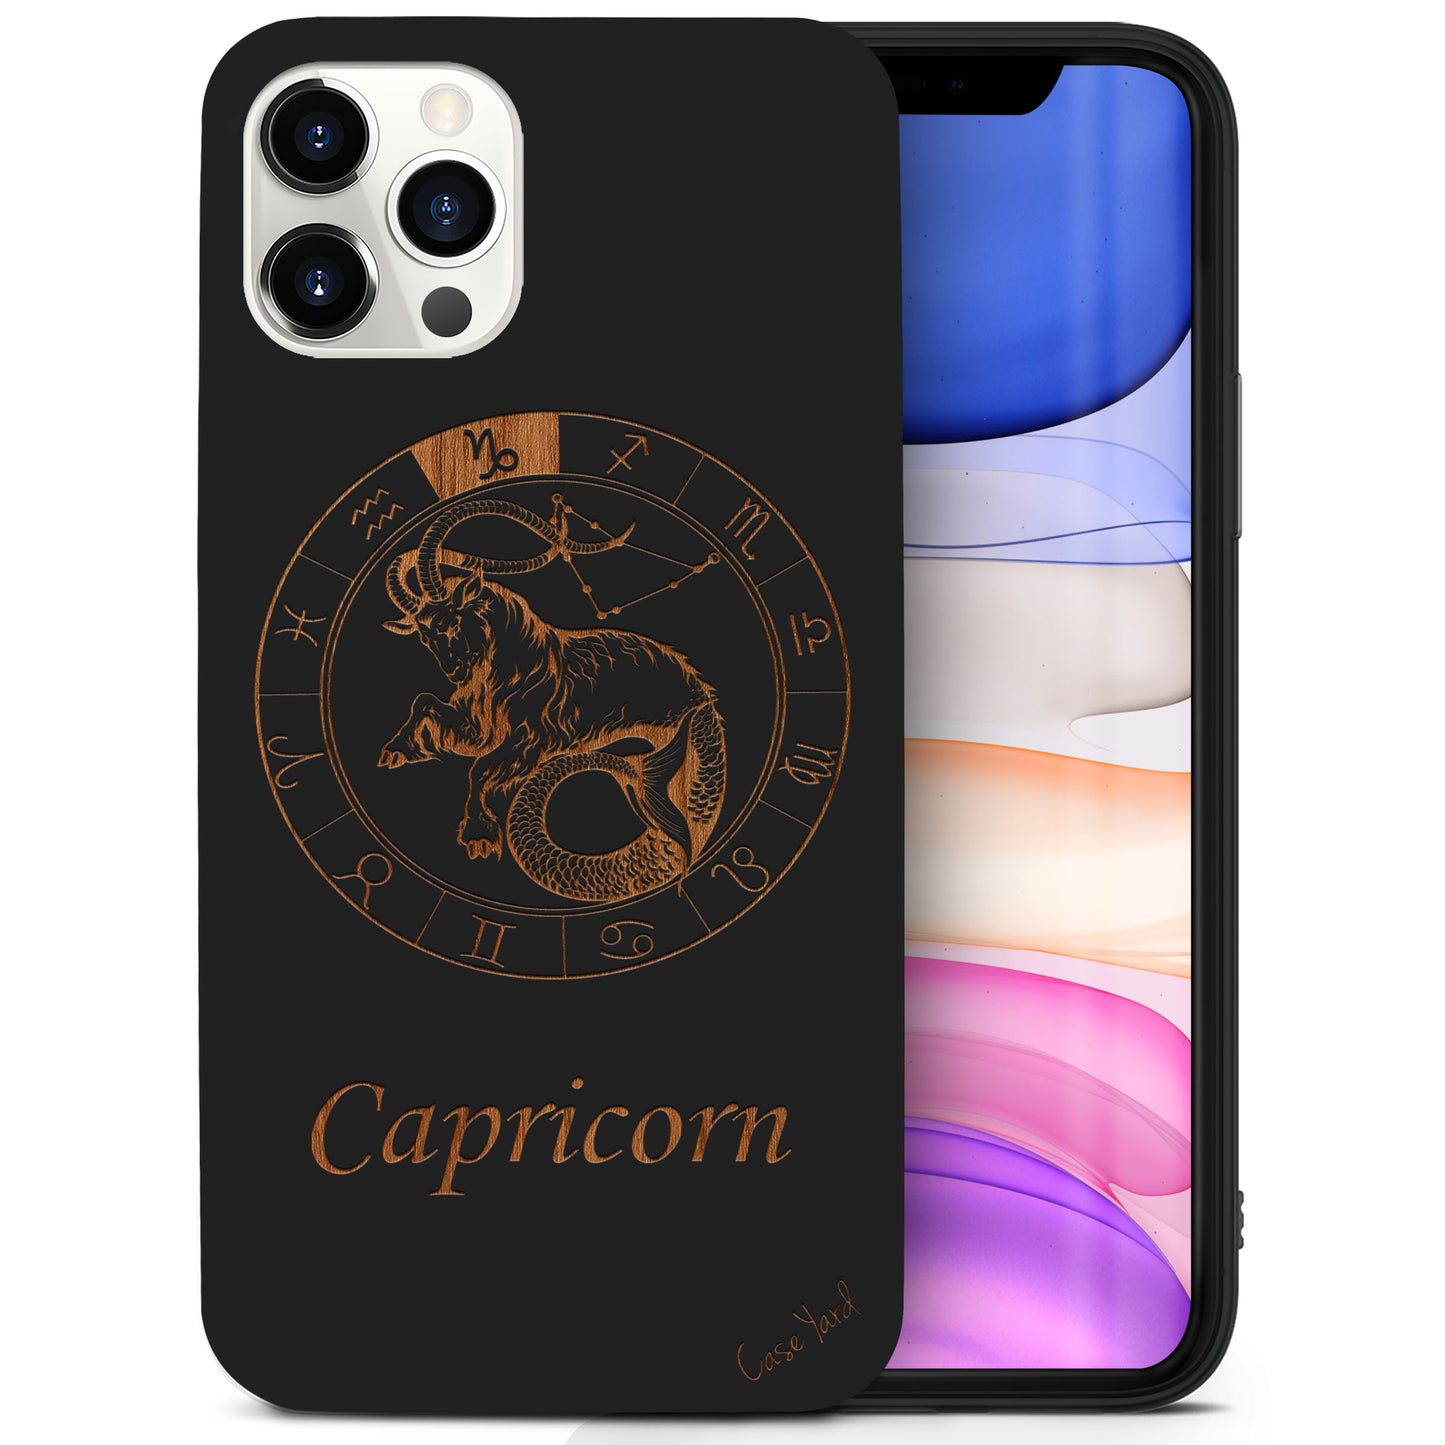 Wooden Cell Phone Case Cover, Laser Engraved case for iPhone & Samsung phone Capricorn Sign Design